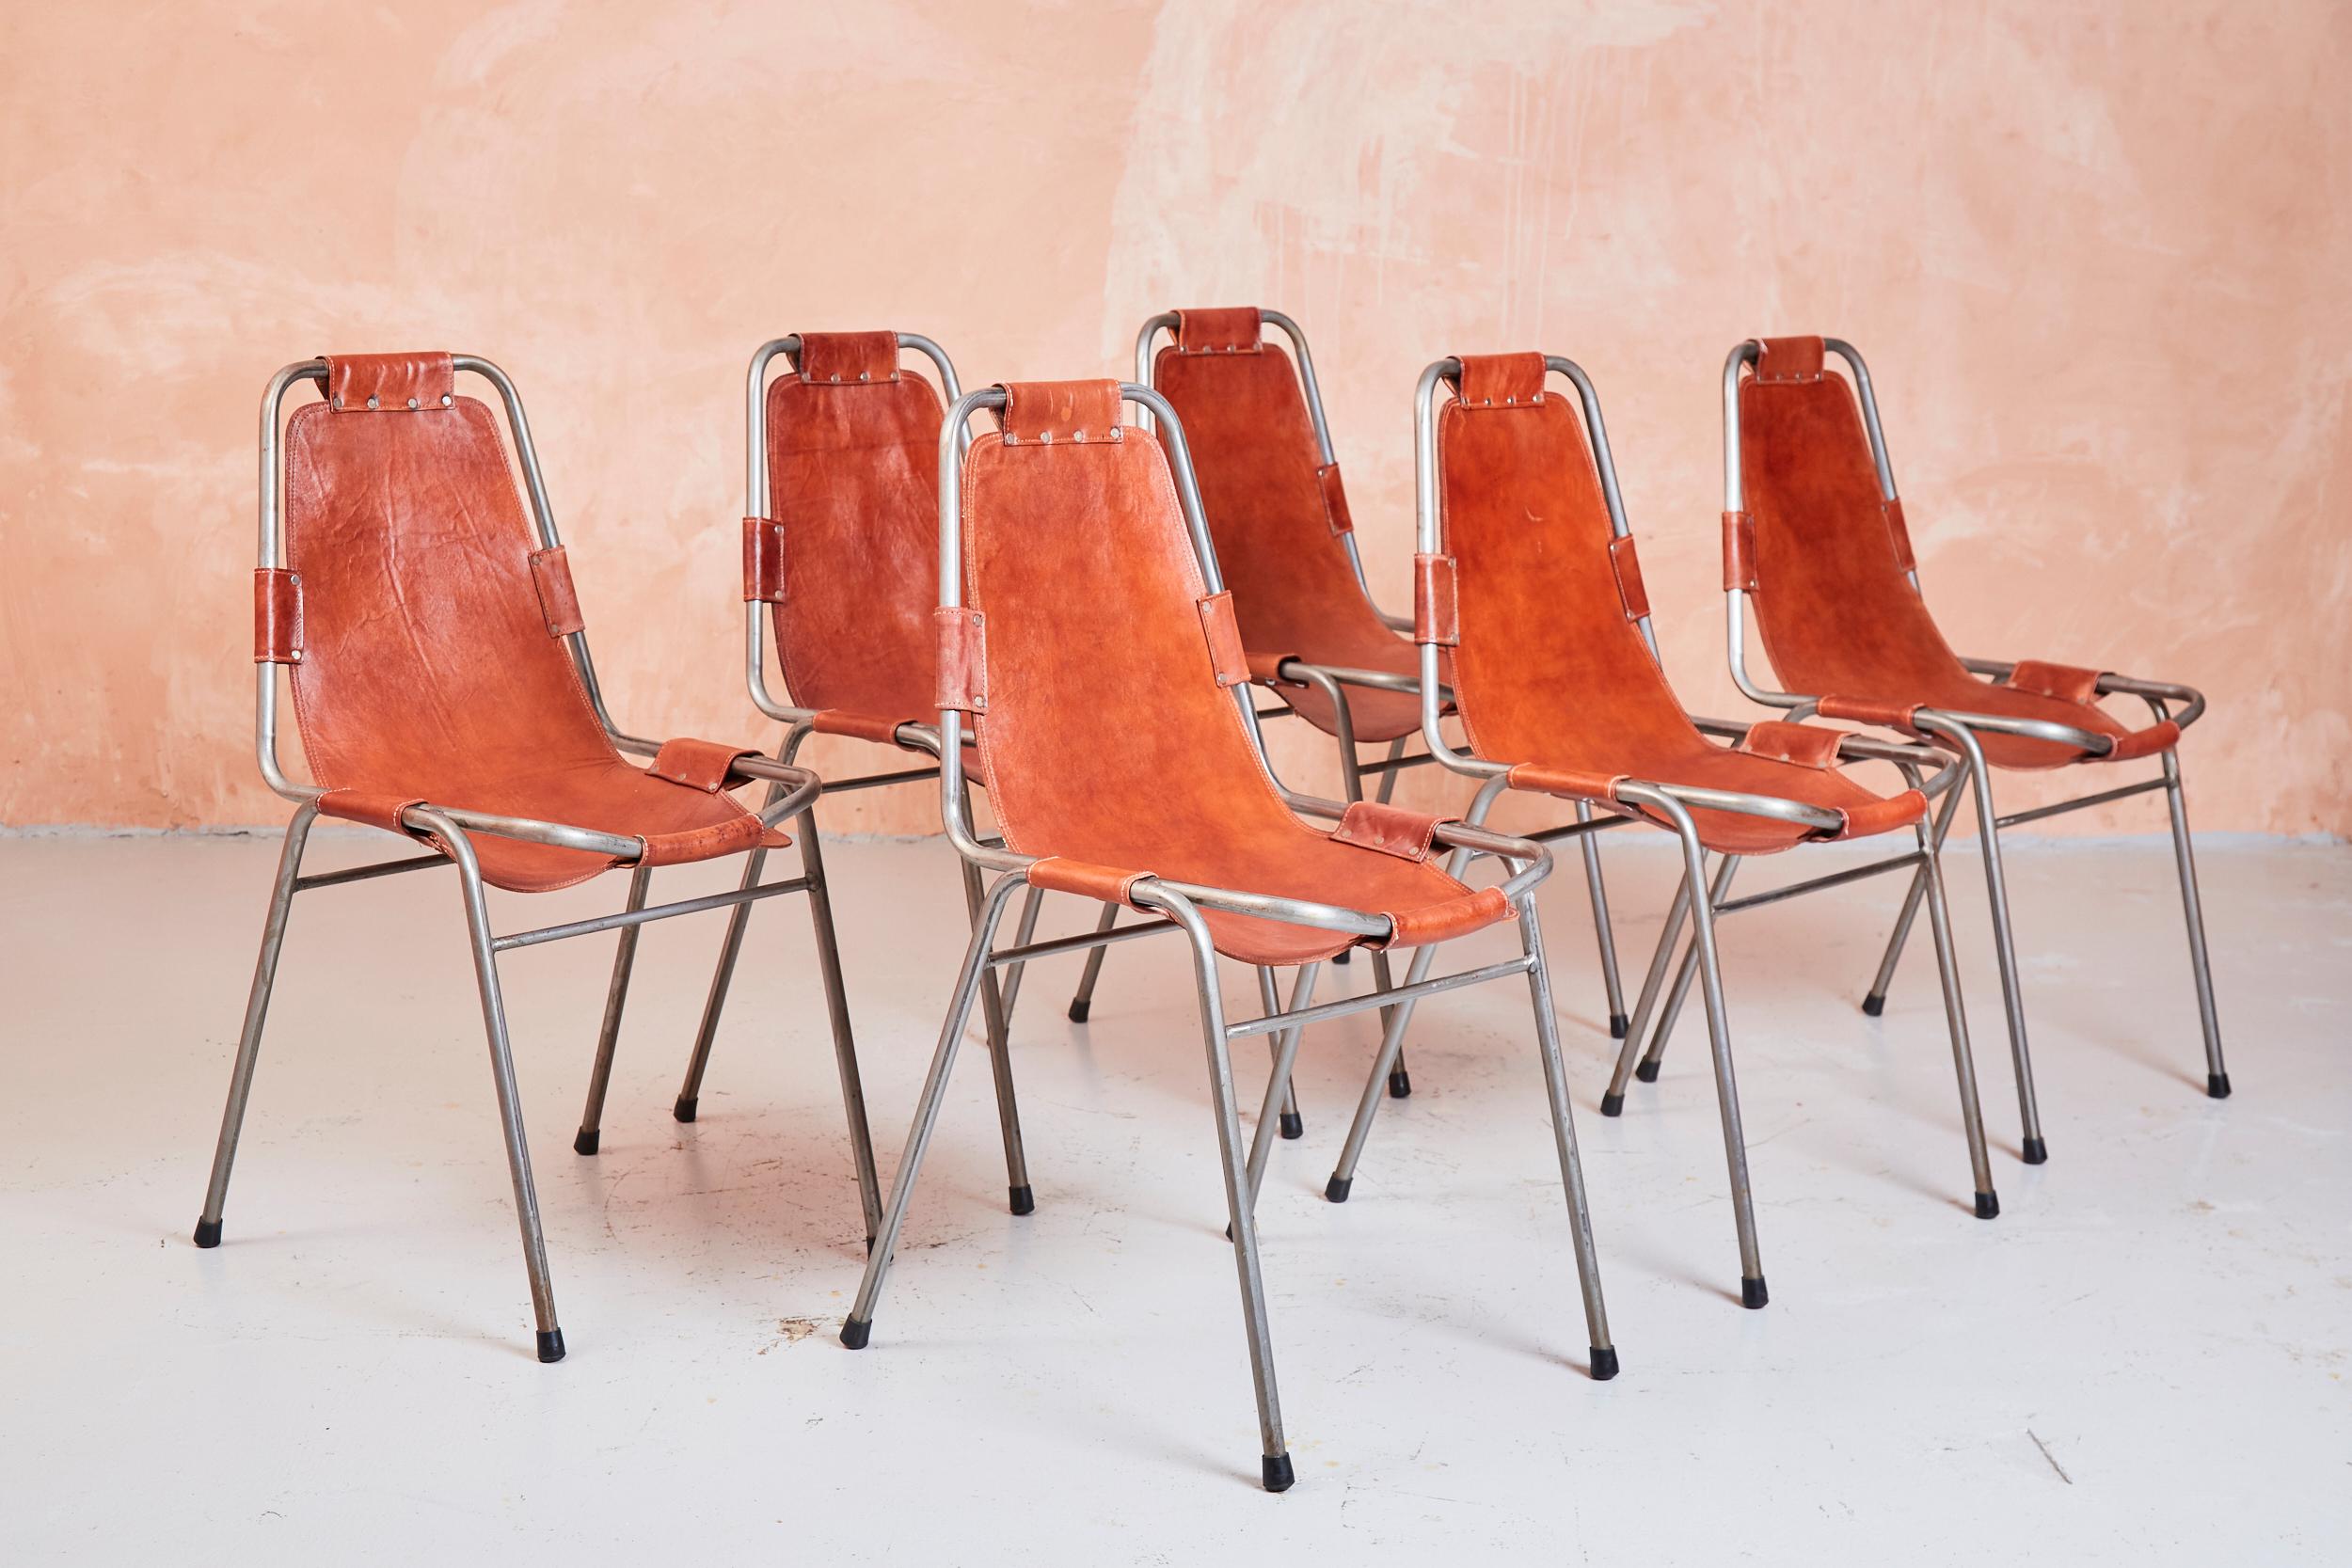 A set of six DalVera chairs, chosen by Charlotte Perriand for the Les Arc ski resort

Two of the set have torn between the seat pad and the suspension strap, the set has been priced accordingly.

These design classics are cited in many